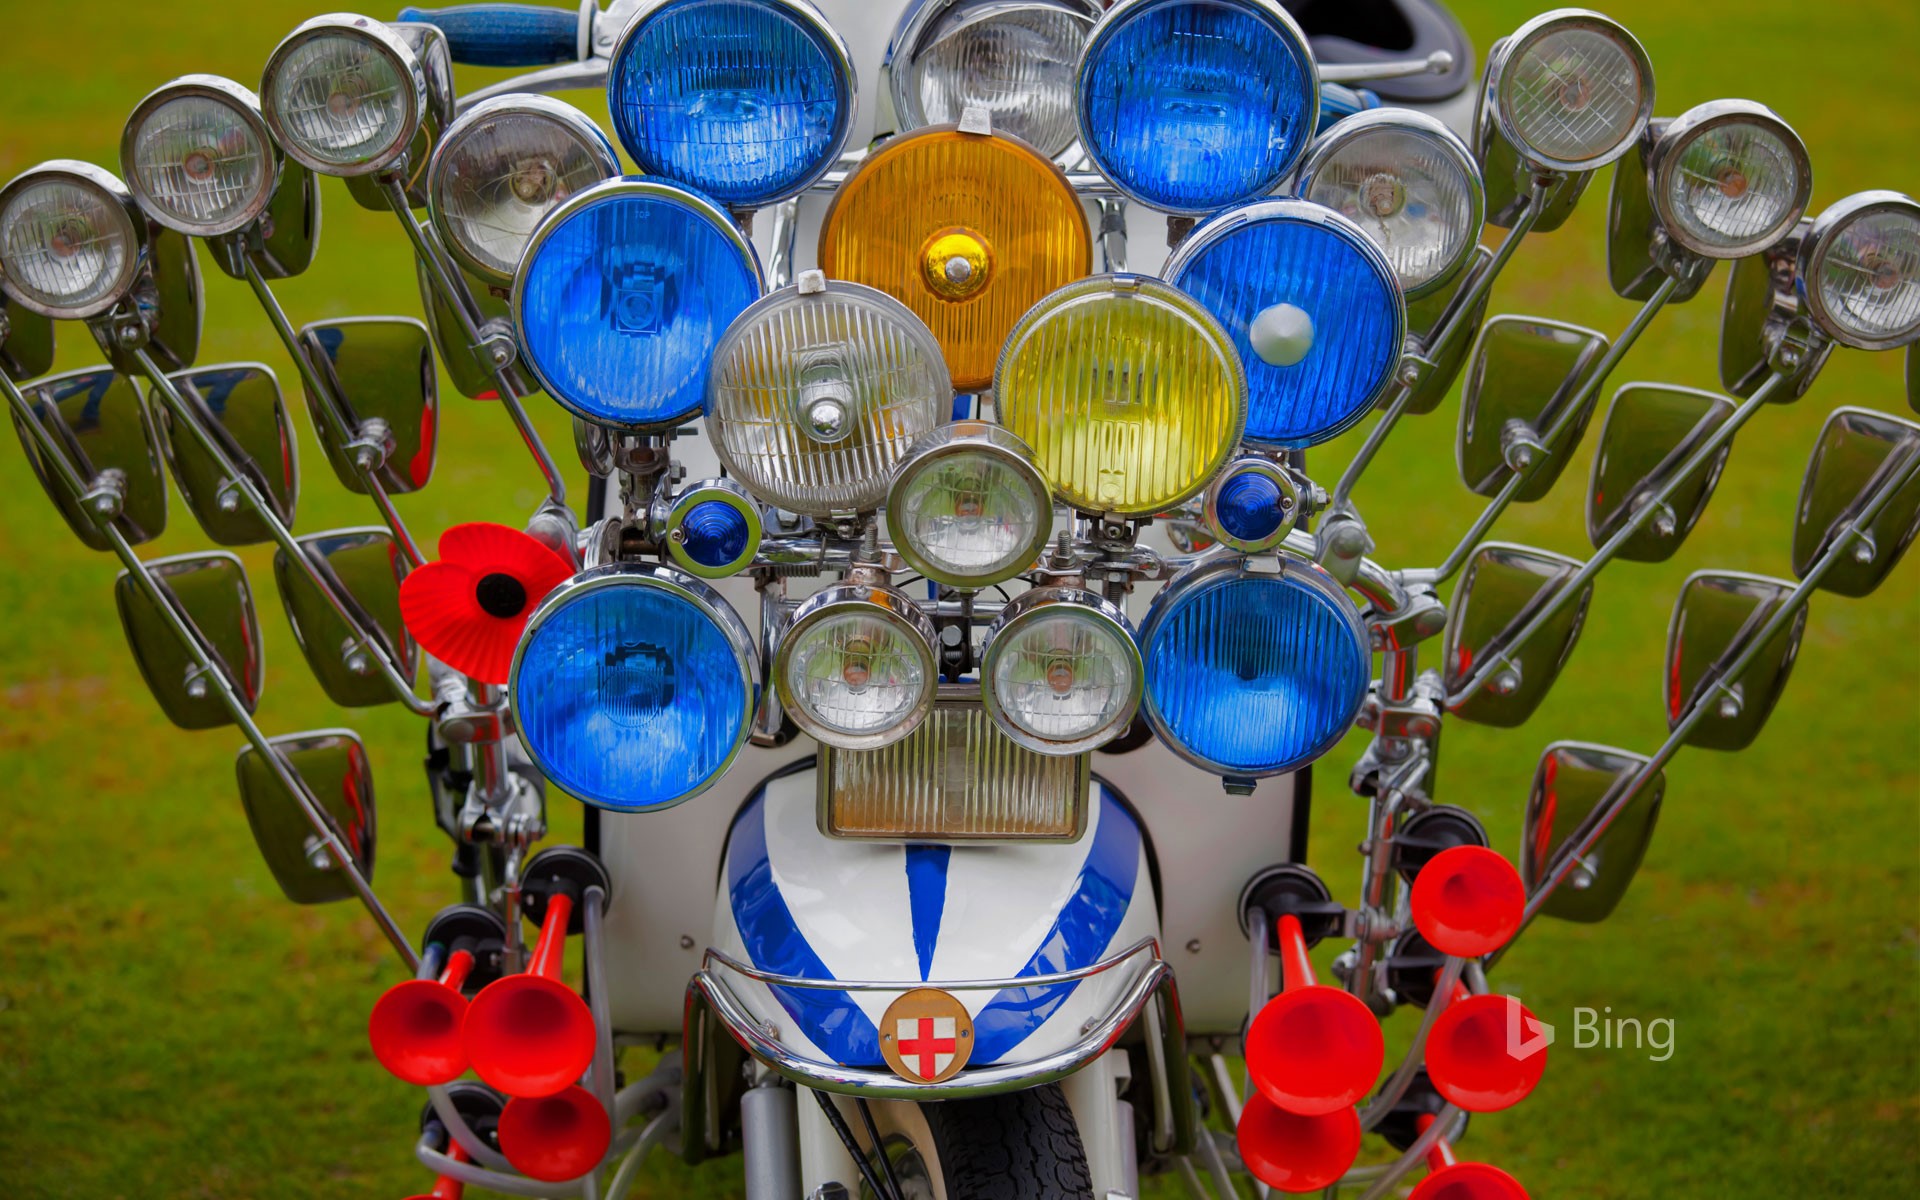 A scooter adorned with multiple mirrors, lights, and air horns